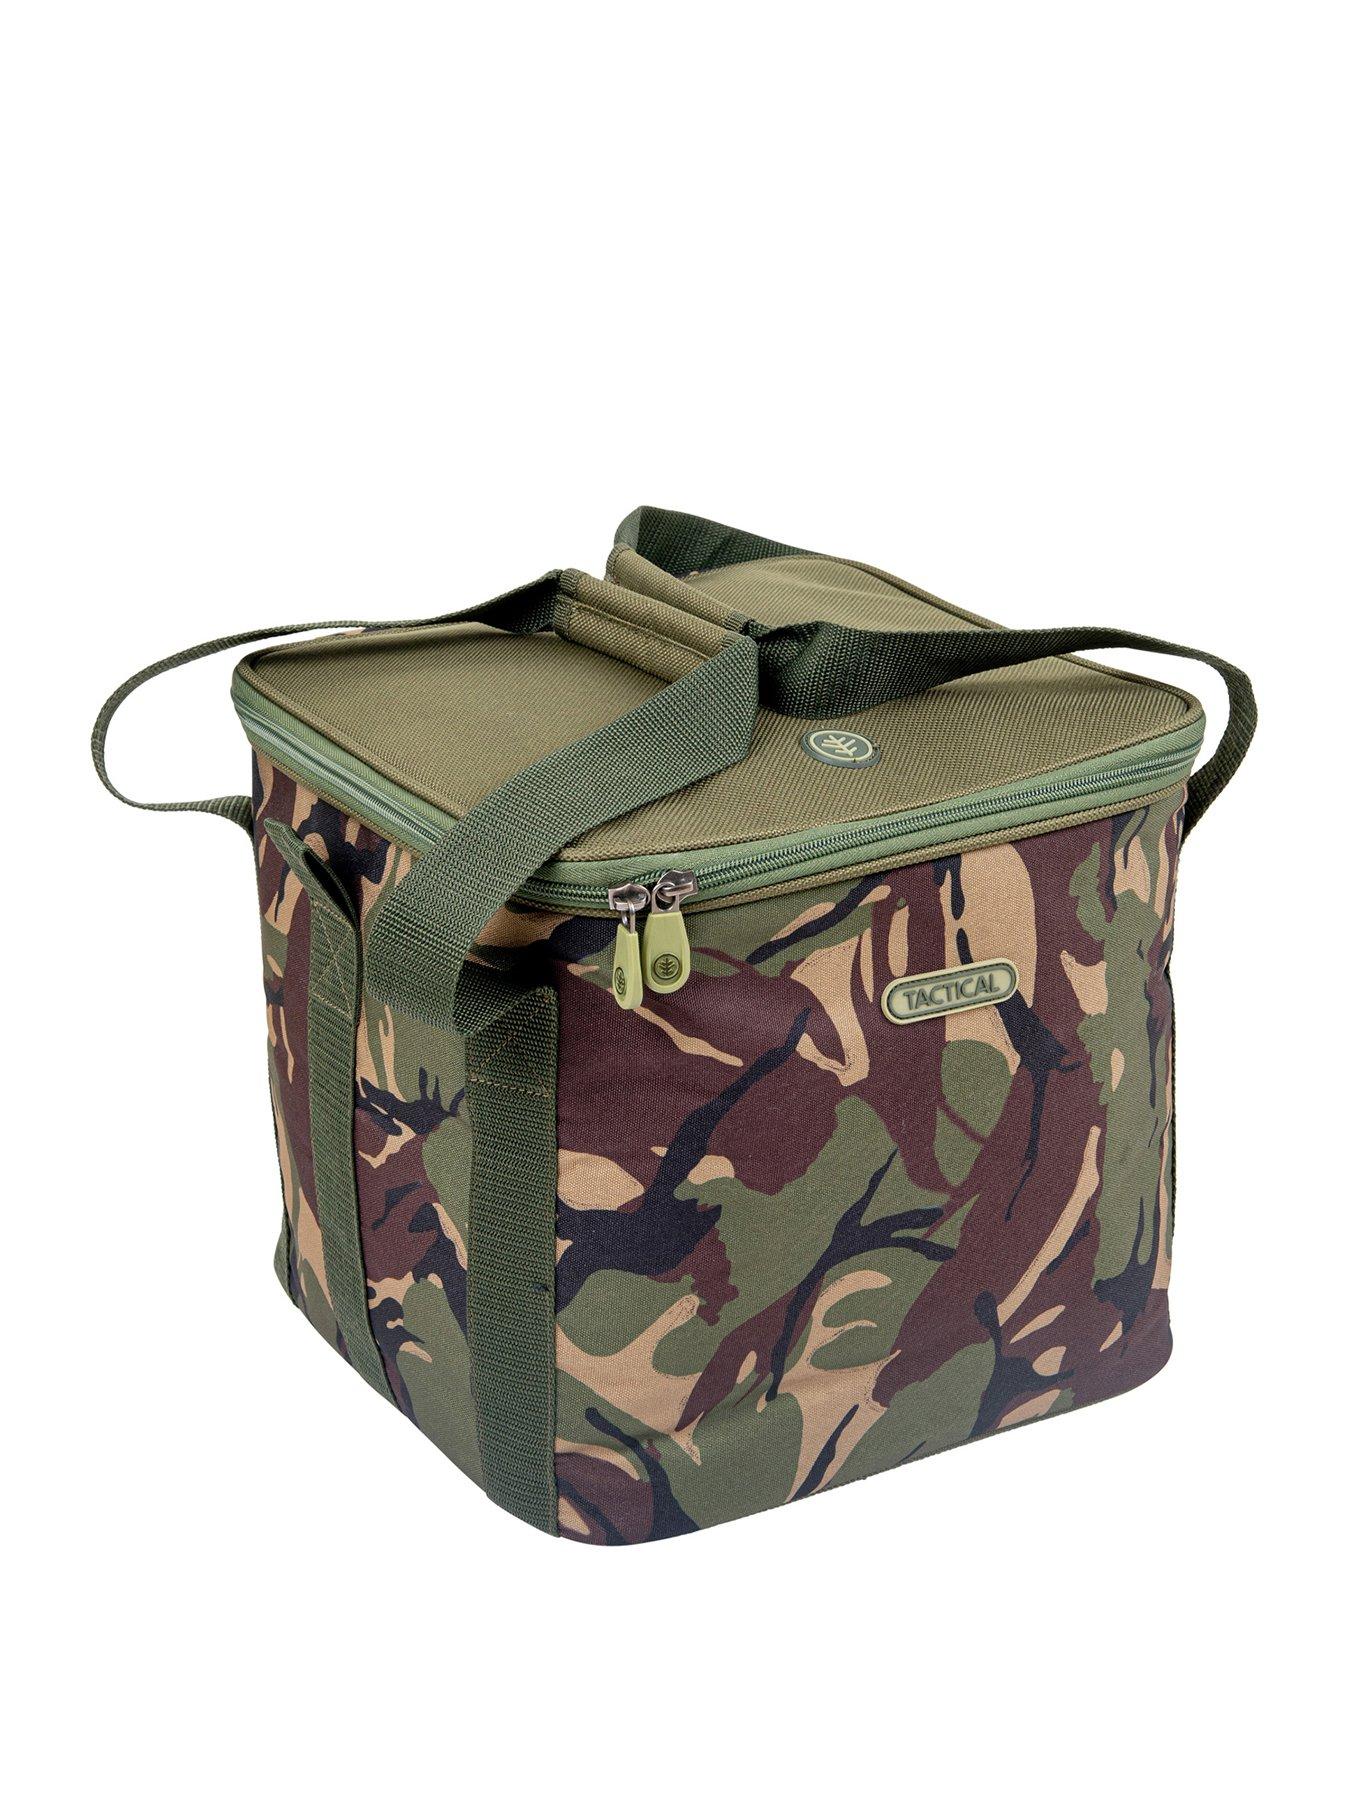 Storage bags & boxes, Fishing equipment, Sports & leisure